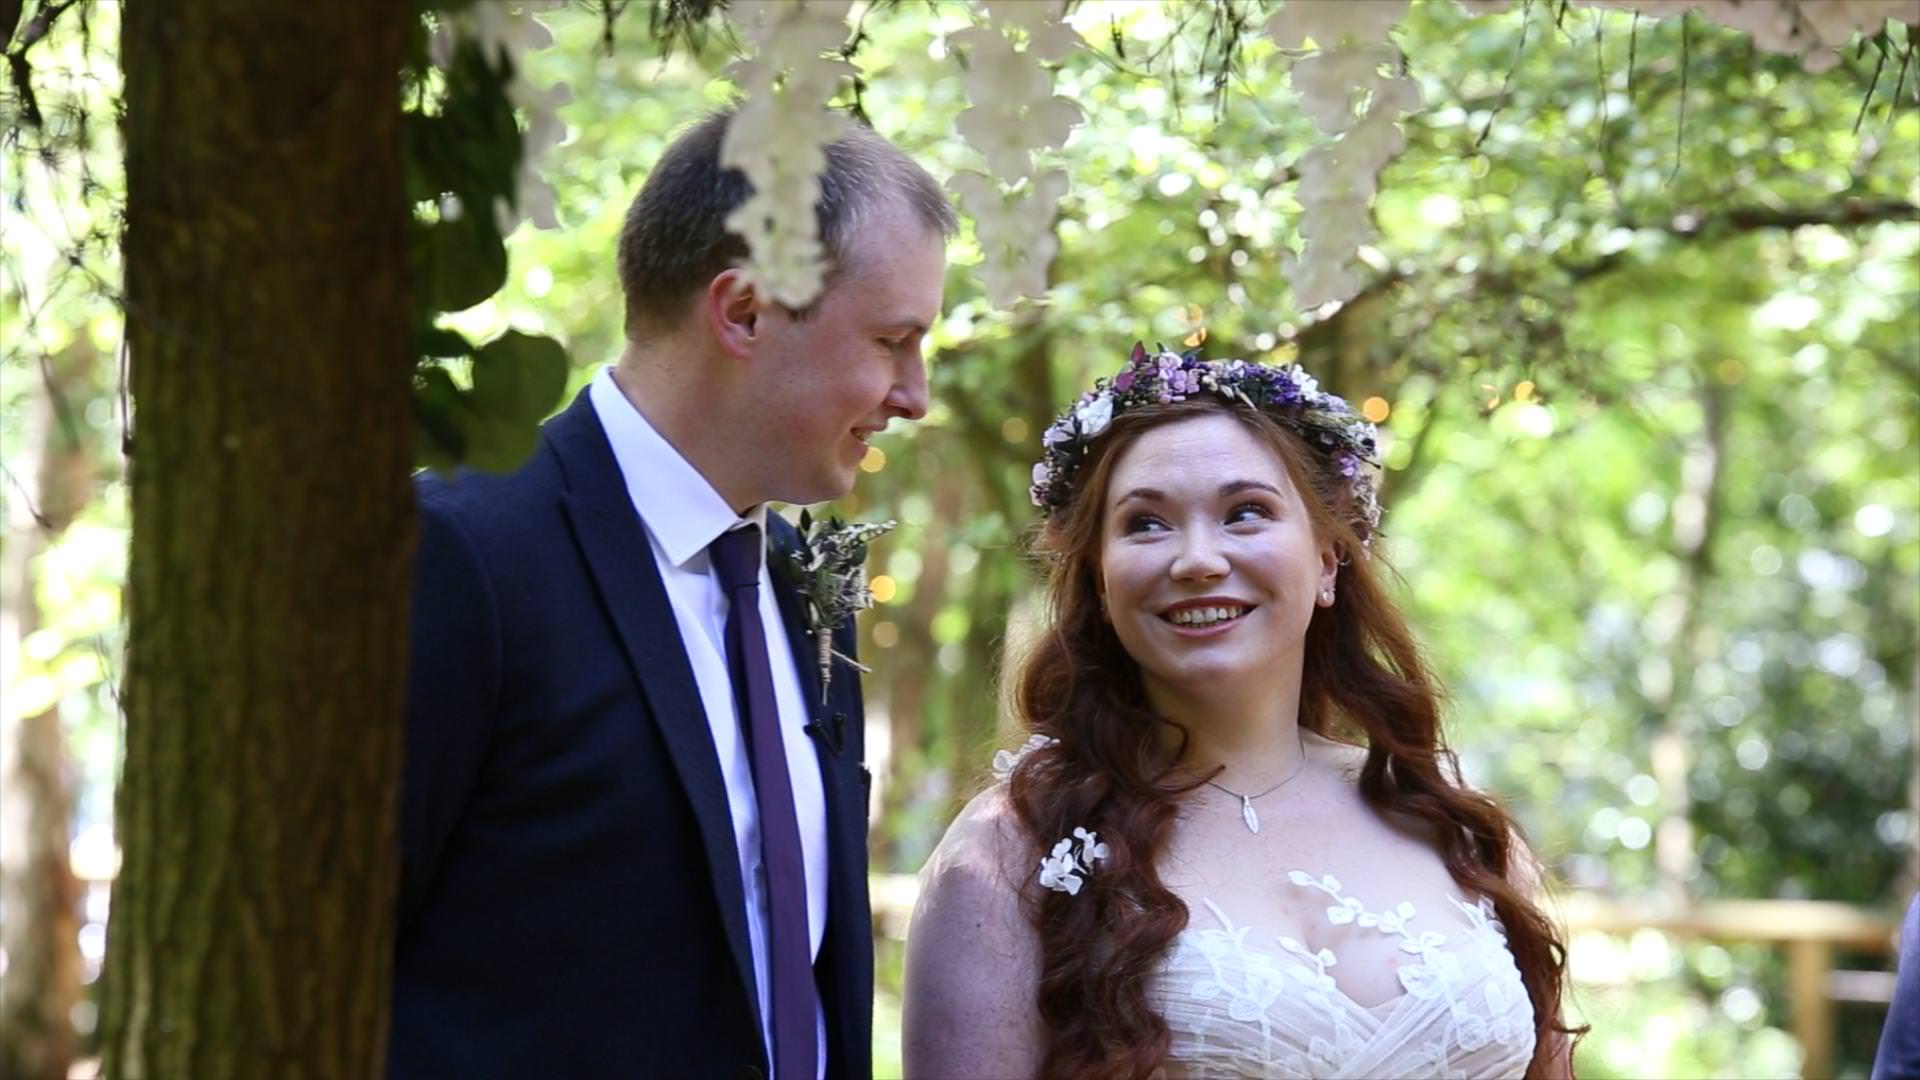 bride looks up and smiles at groom during outdoor ceremony